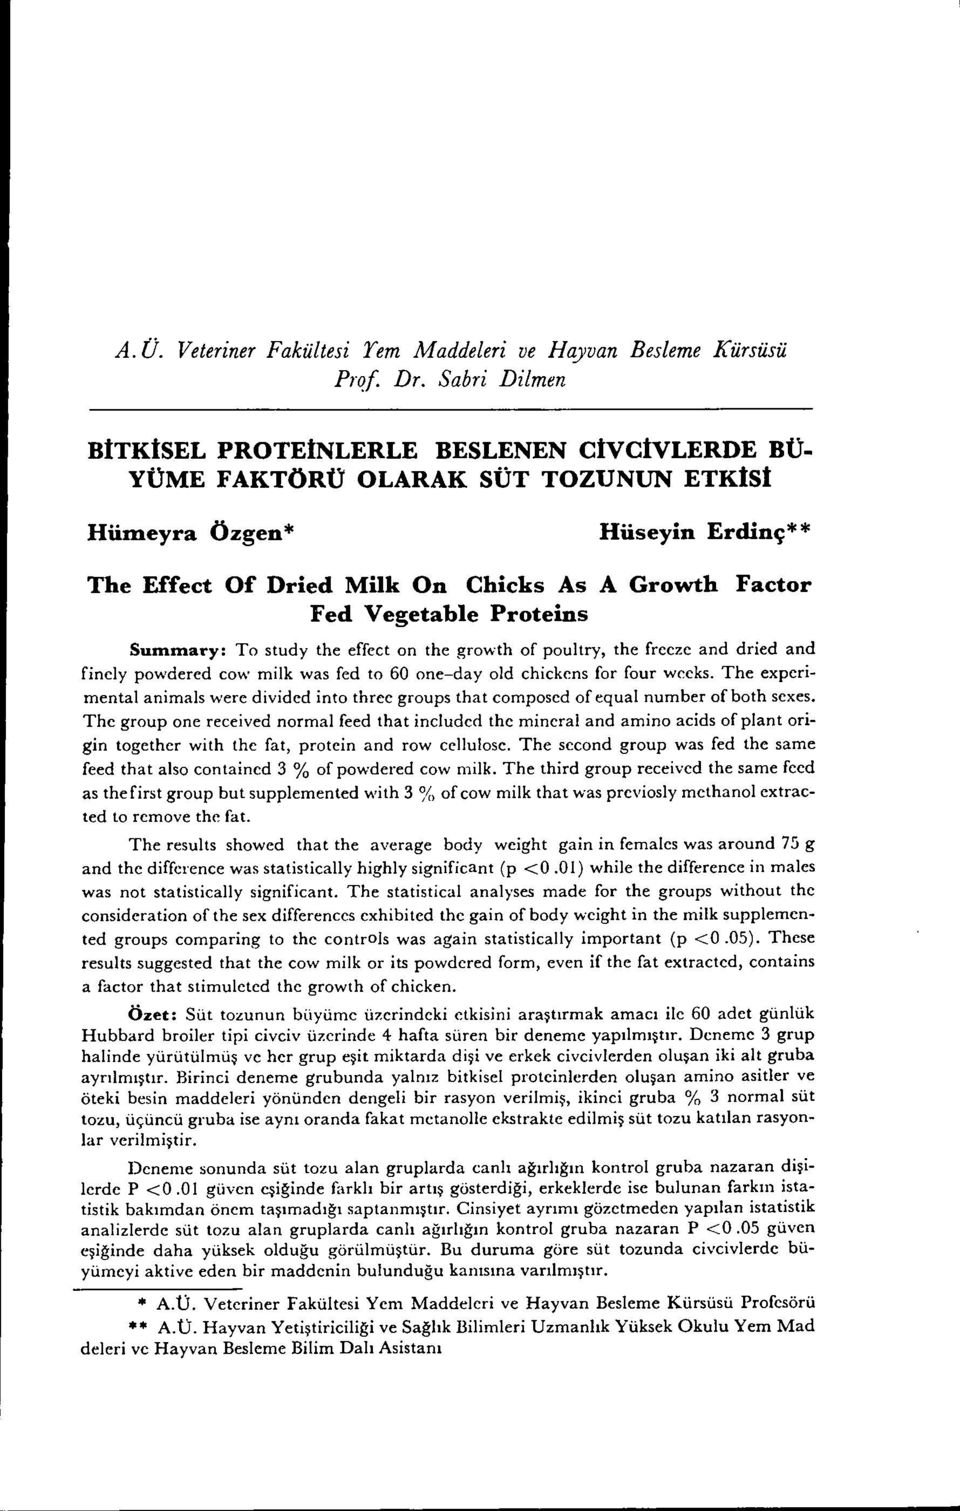 poultry, the frccze and dried and fincly powdered cow milk was fed to 60 one-day old chiekens for four weeks.